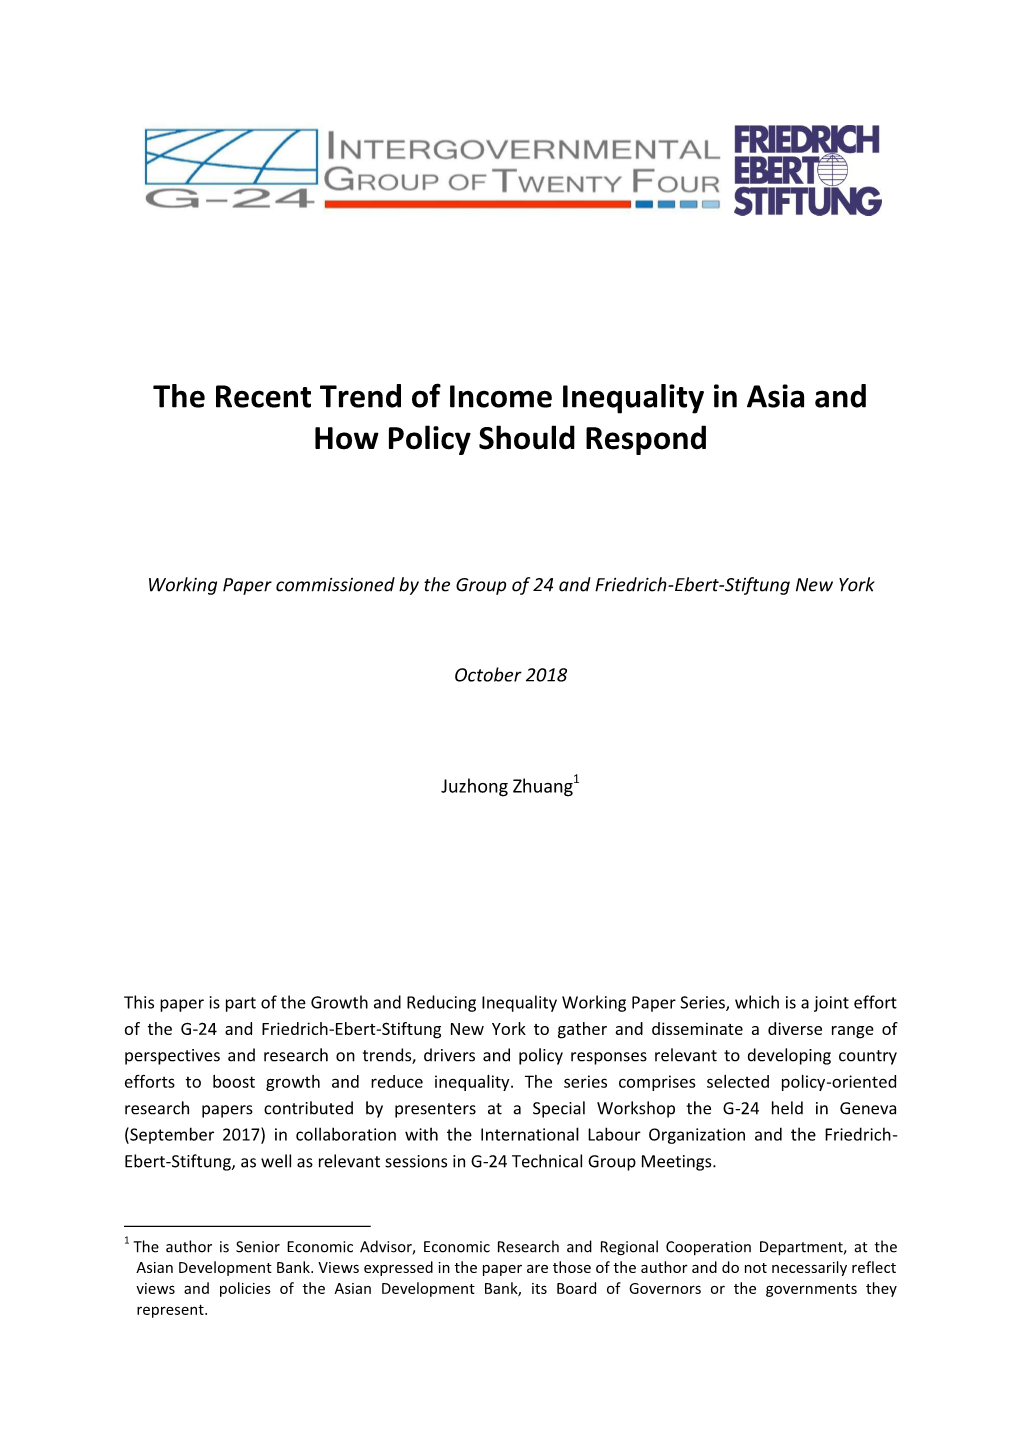 The Recent Trend of Income Inequality in Asia and How Policy Should Respond